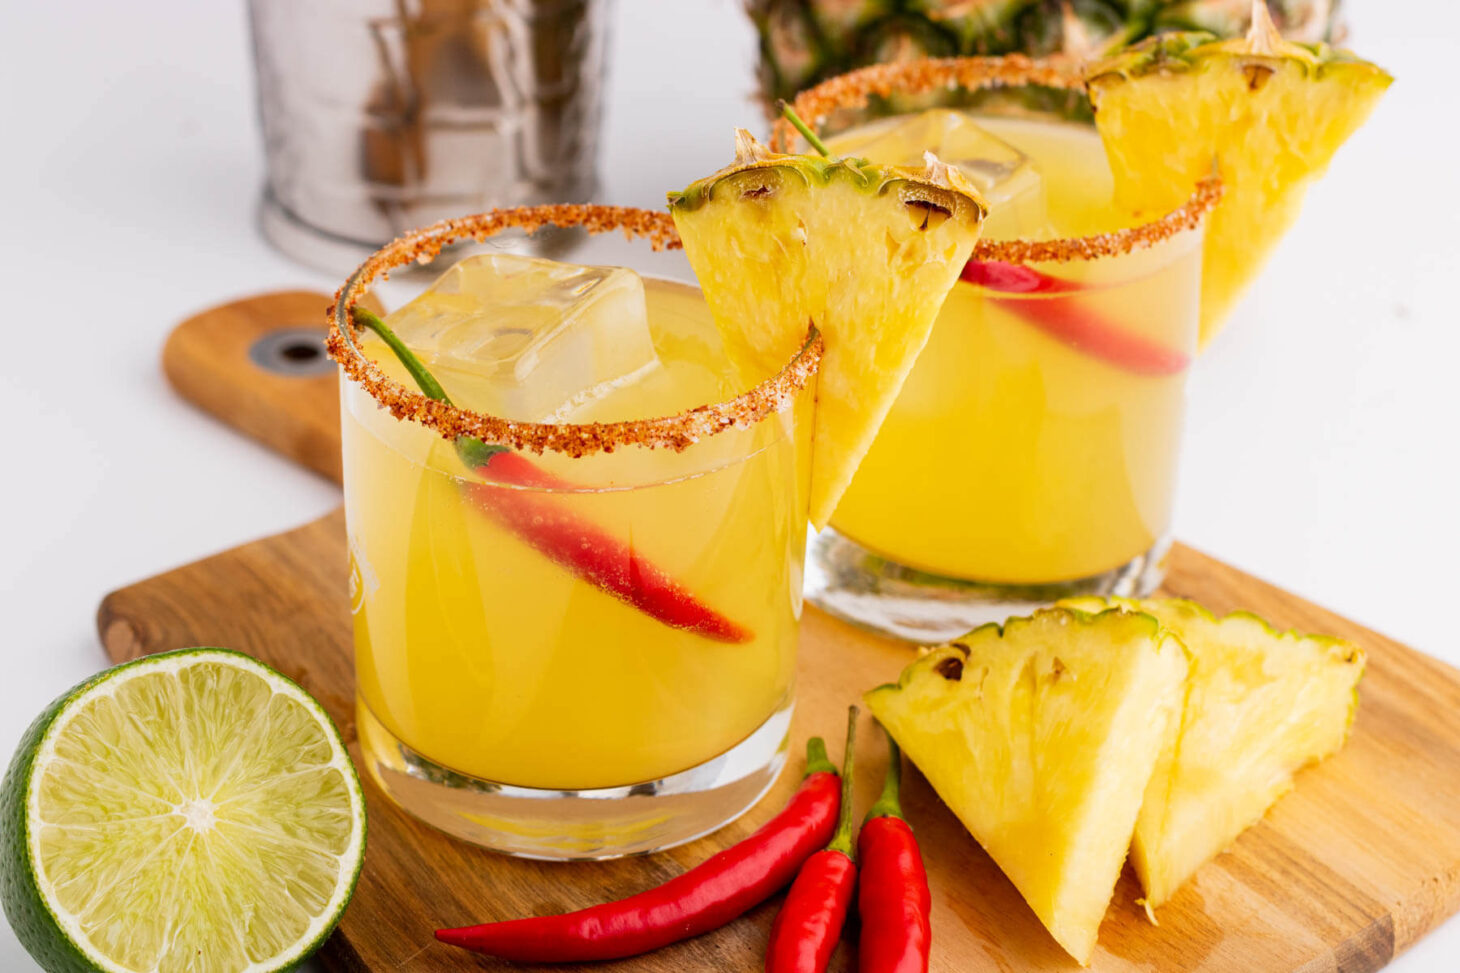 Two Spicy Pineapple Margaritas in red rimmed rocks glasses garnished with a wedge of pineapple and red chili pepper.